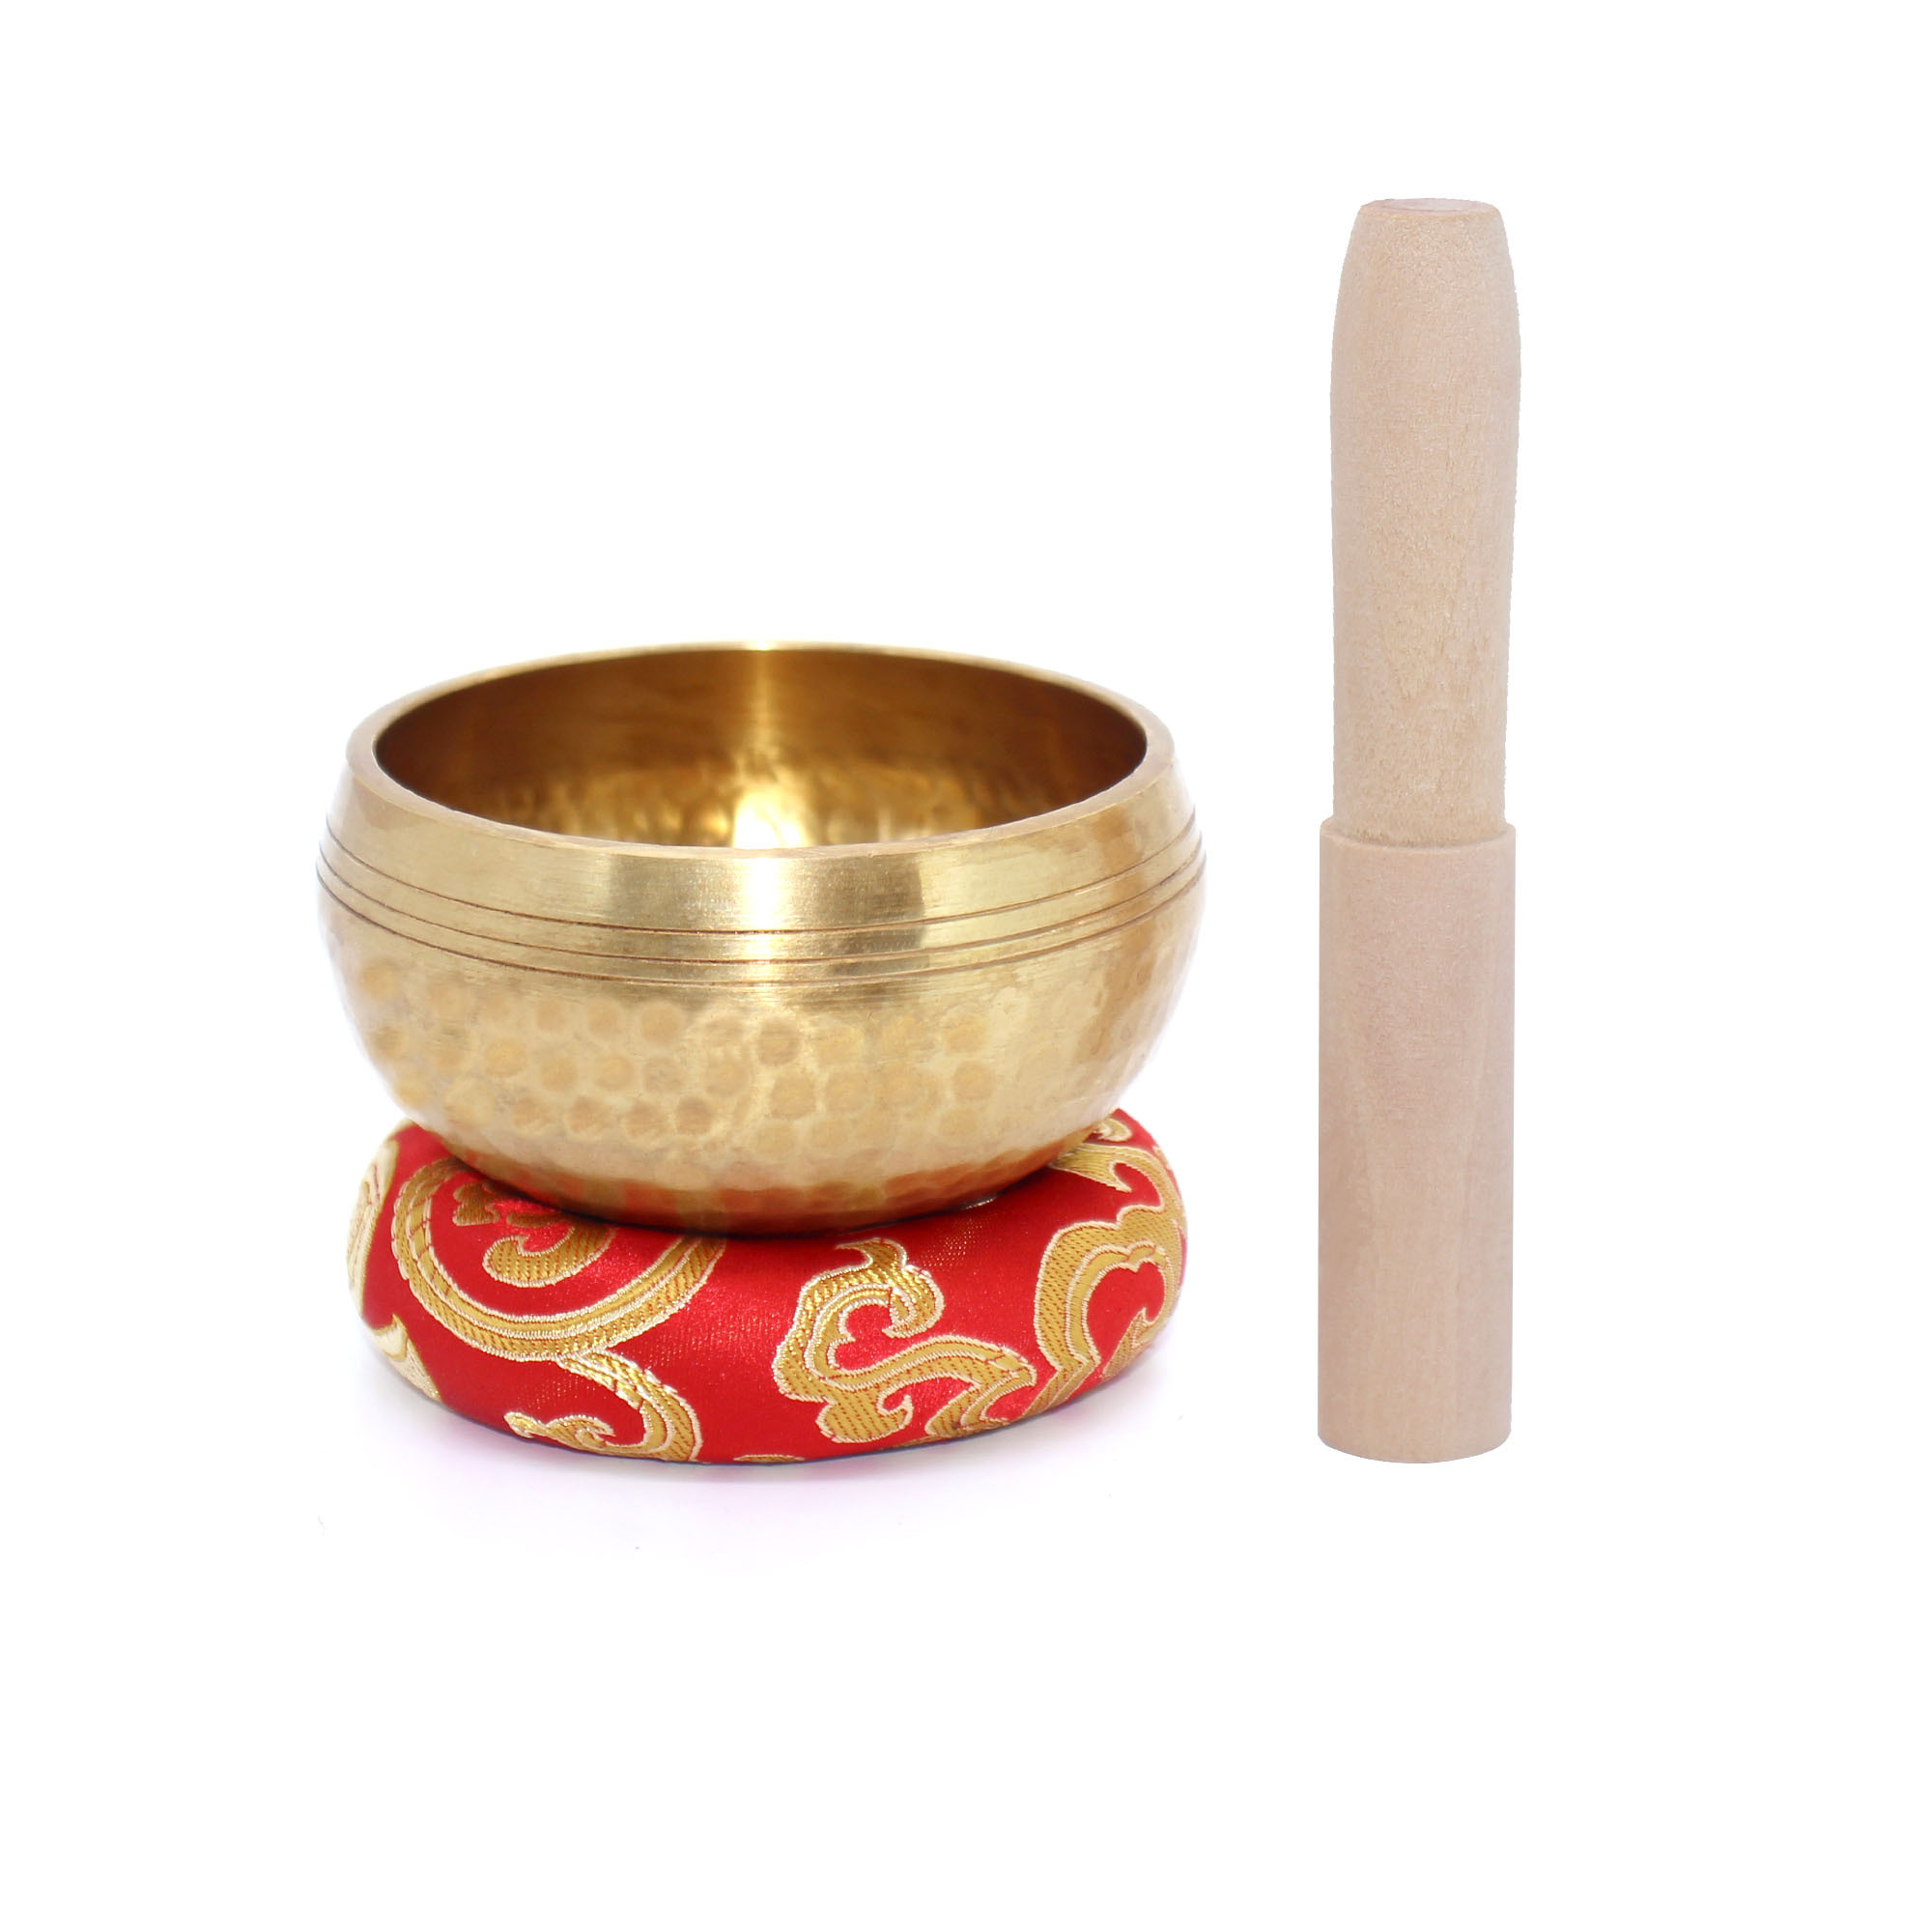 Singing Bowl Set Meditation Sound Bowl Handcrafted in for Yoga Chakra  Healing Mindfulness, and Stress Relief Unique Spiritual Gifts for Women and  Men